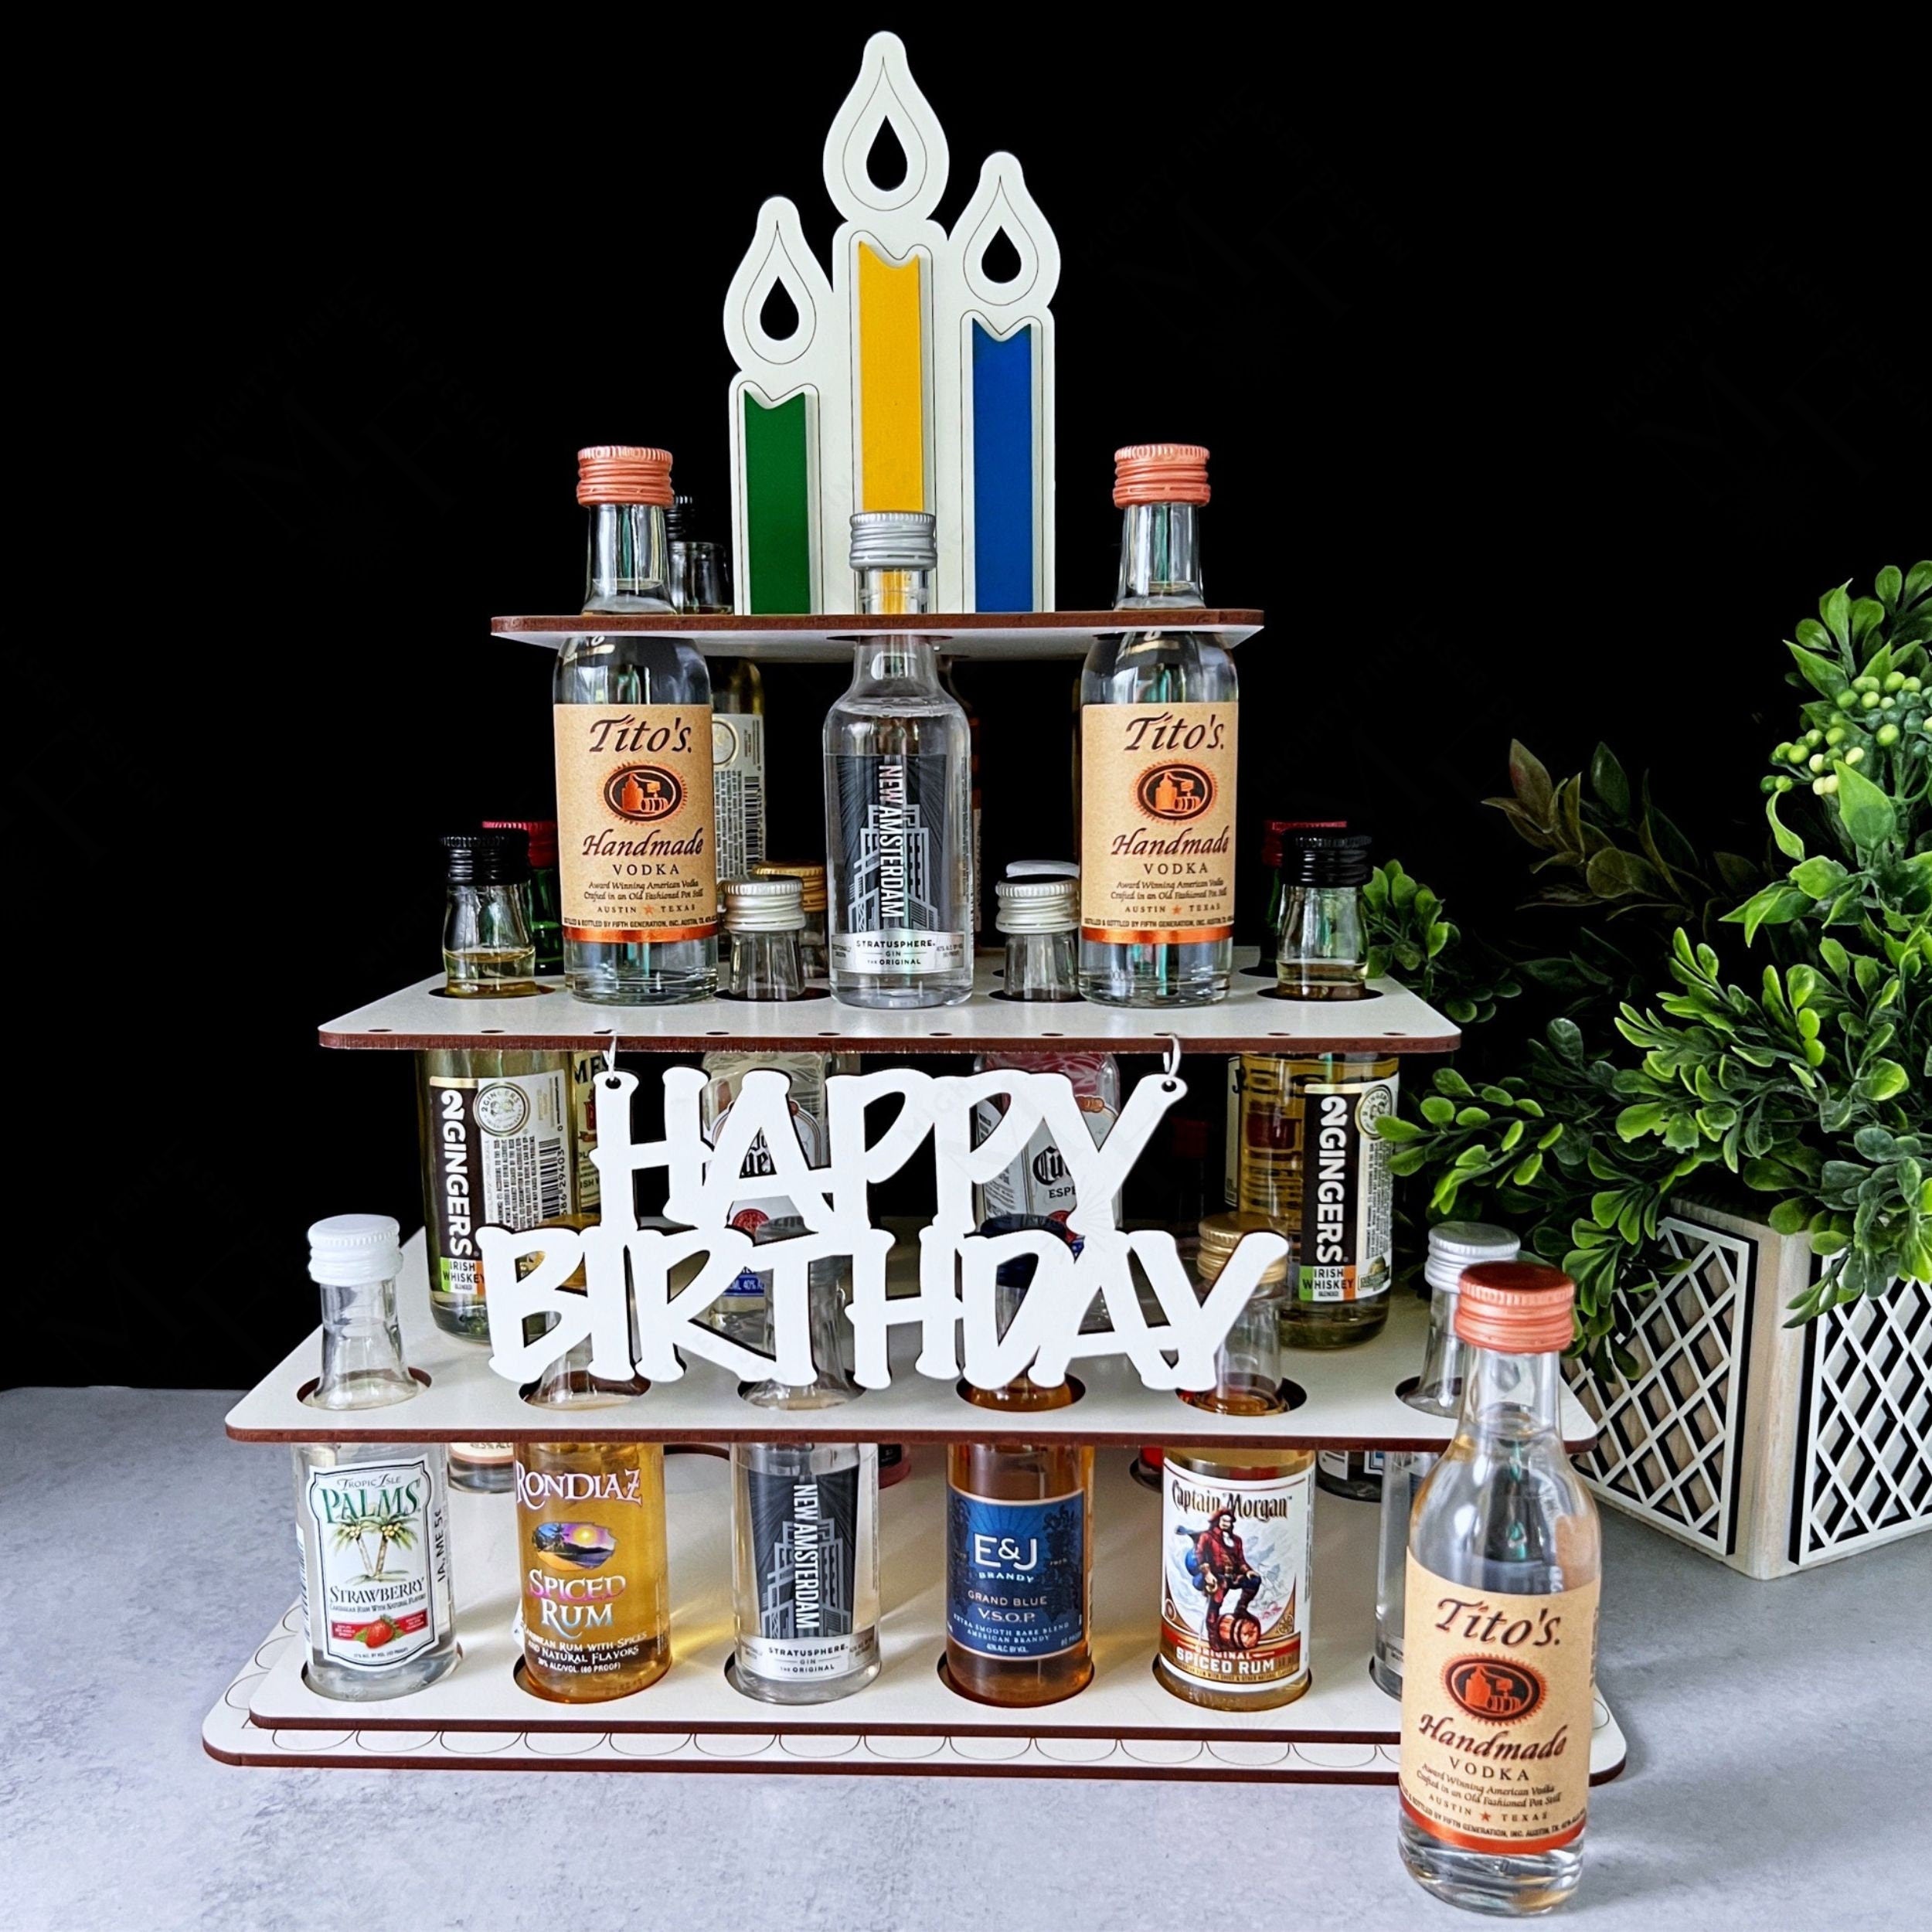 Impress Your Guests with an Alcohol Bottle Cake | Yummy Cake